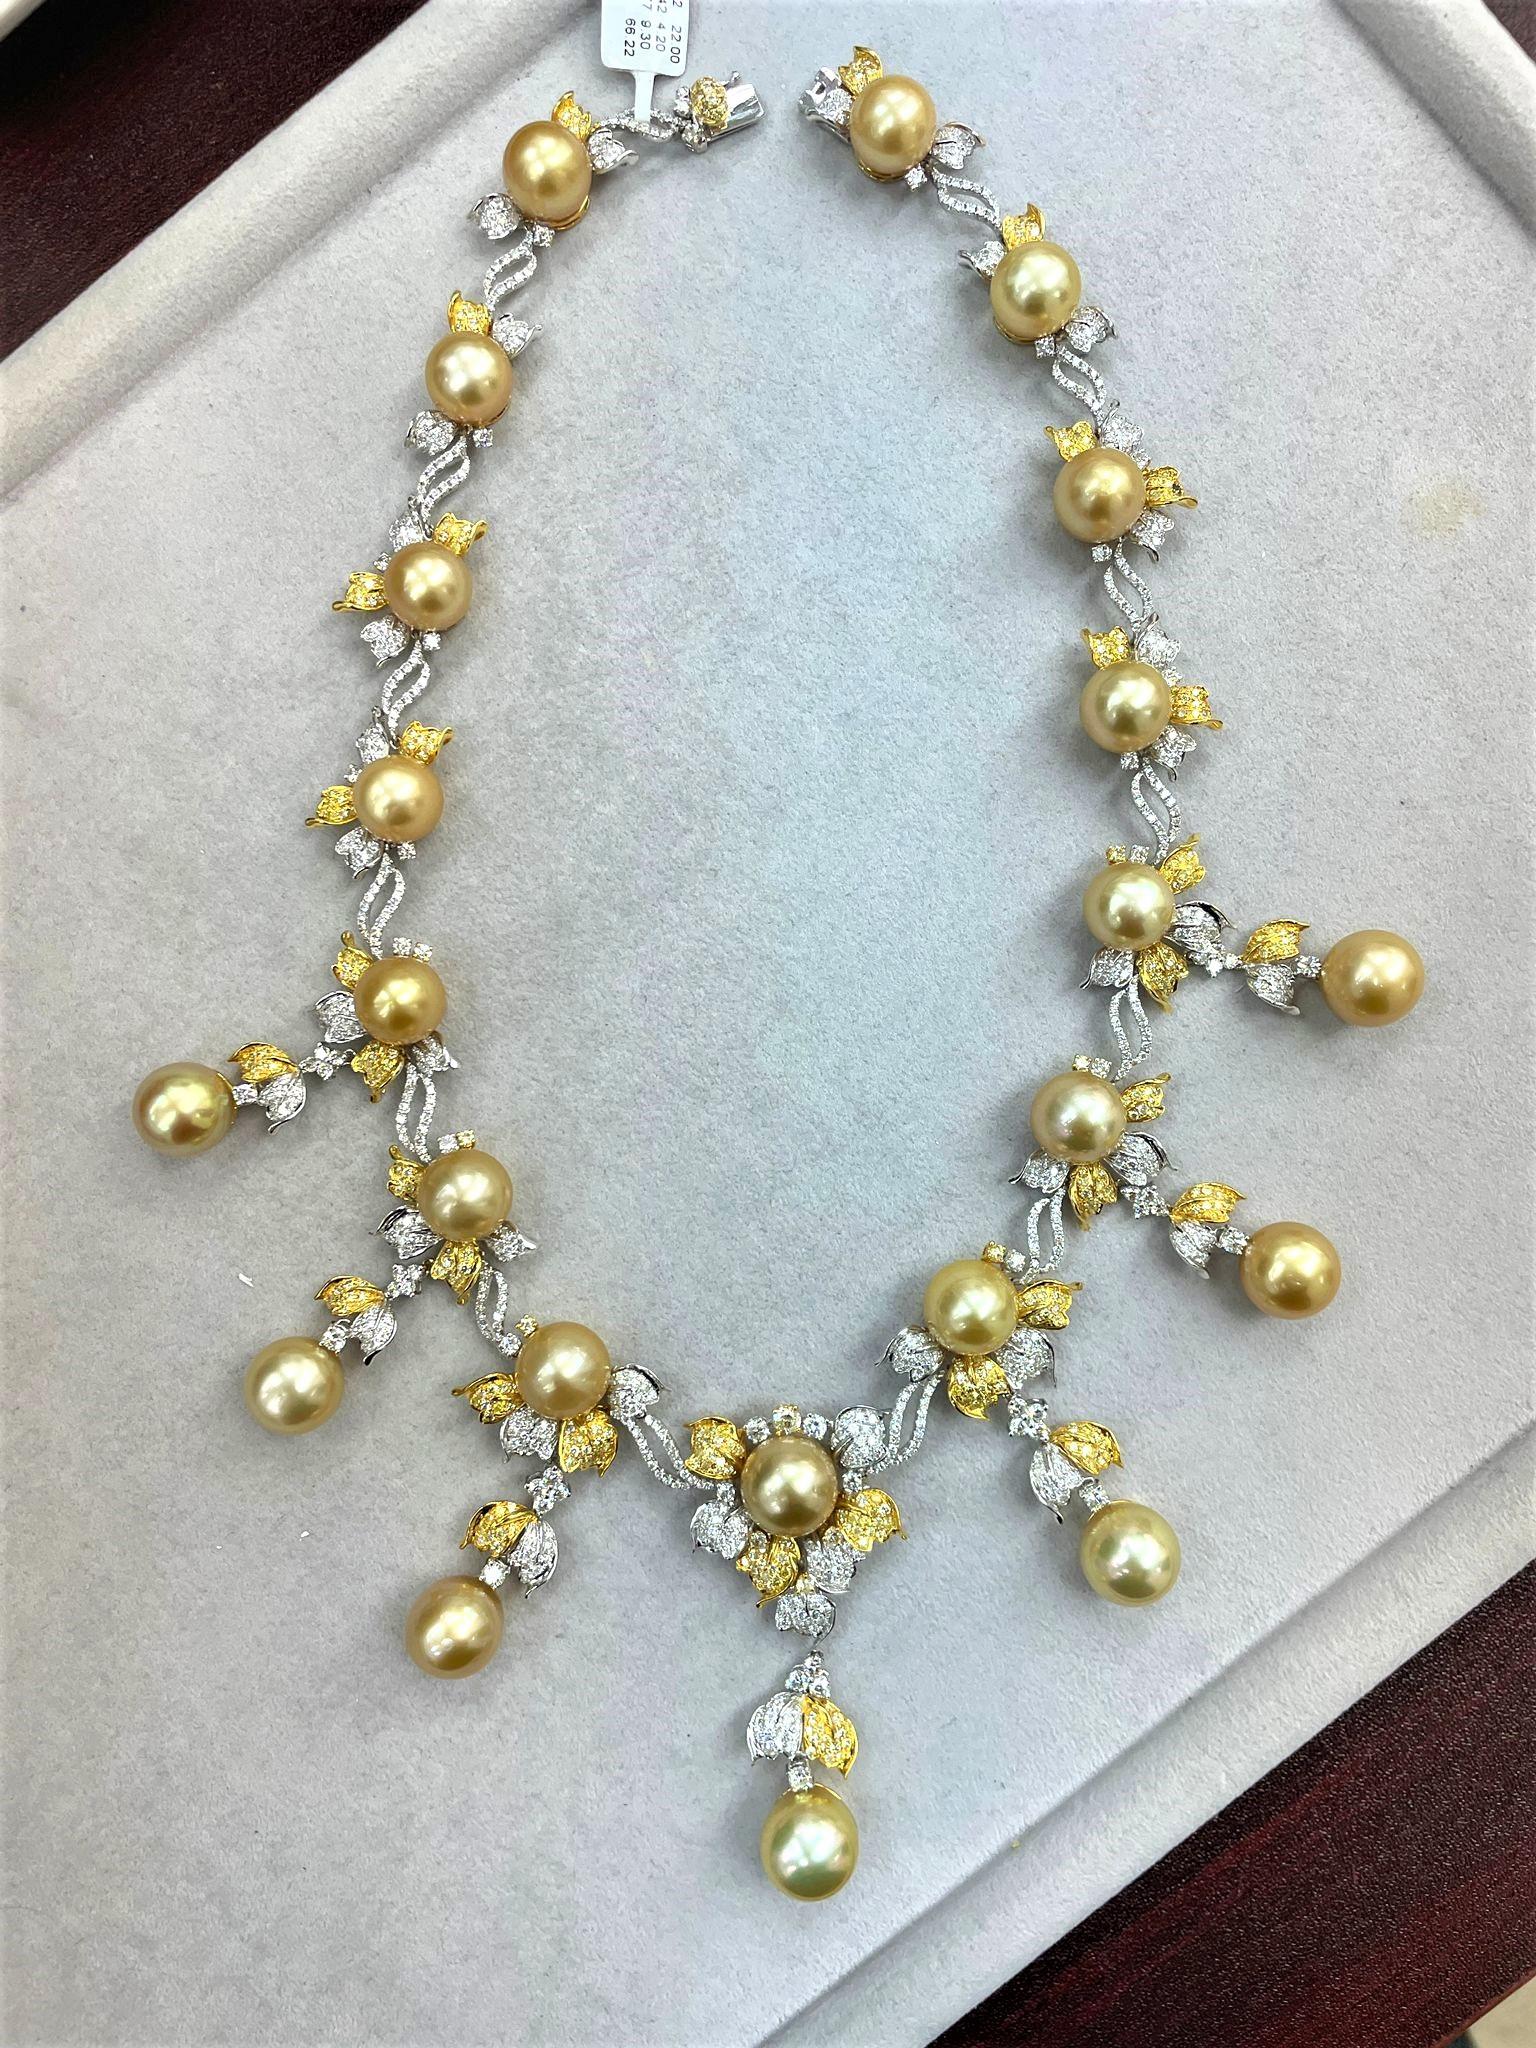 The Following Item we are offering is this Beautiful Rare Important 18KT White and Yellow Gold Pearl and Diamond Necklace. Necklace is comprised of Beautiful Magnificent High Luster Large 22 AA-AAA GOLDEN PRISTINE SOUTH SEA PEARLS that give off a